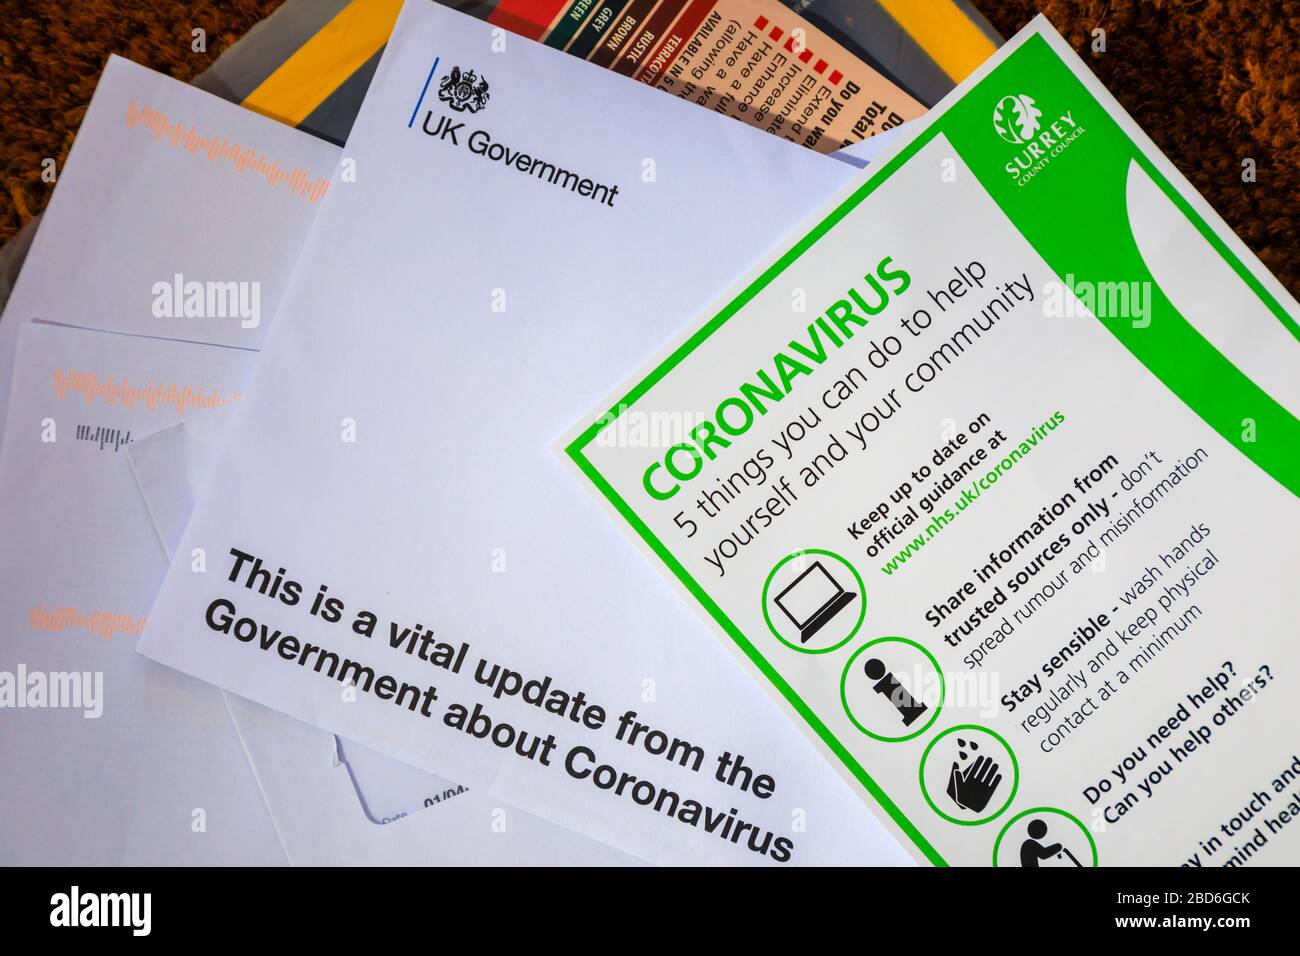 Coronavirus pandemic: advice and instructions from the UK Government delivered by post arrive at every home with a leaflet from Surrey County Council Stock Photo